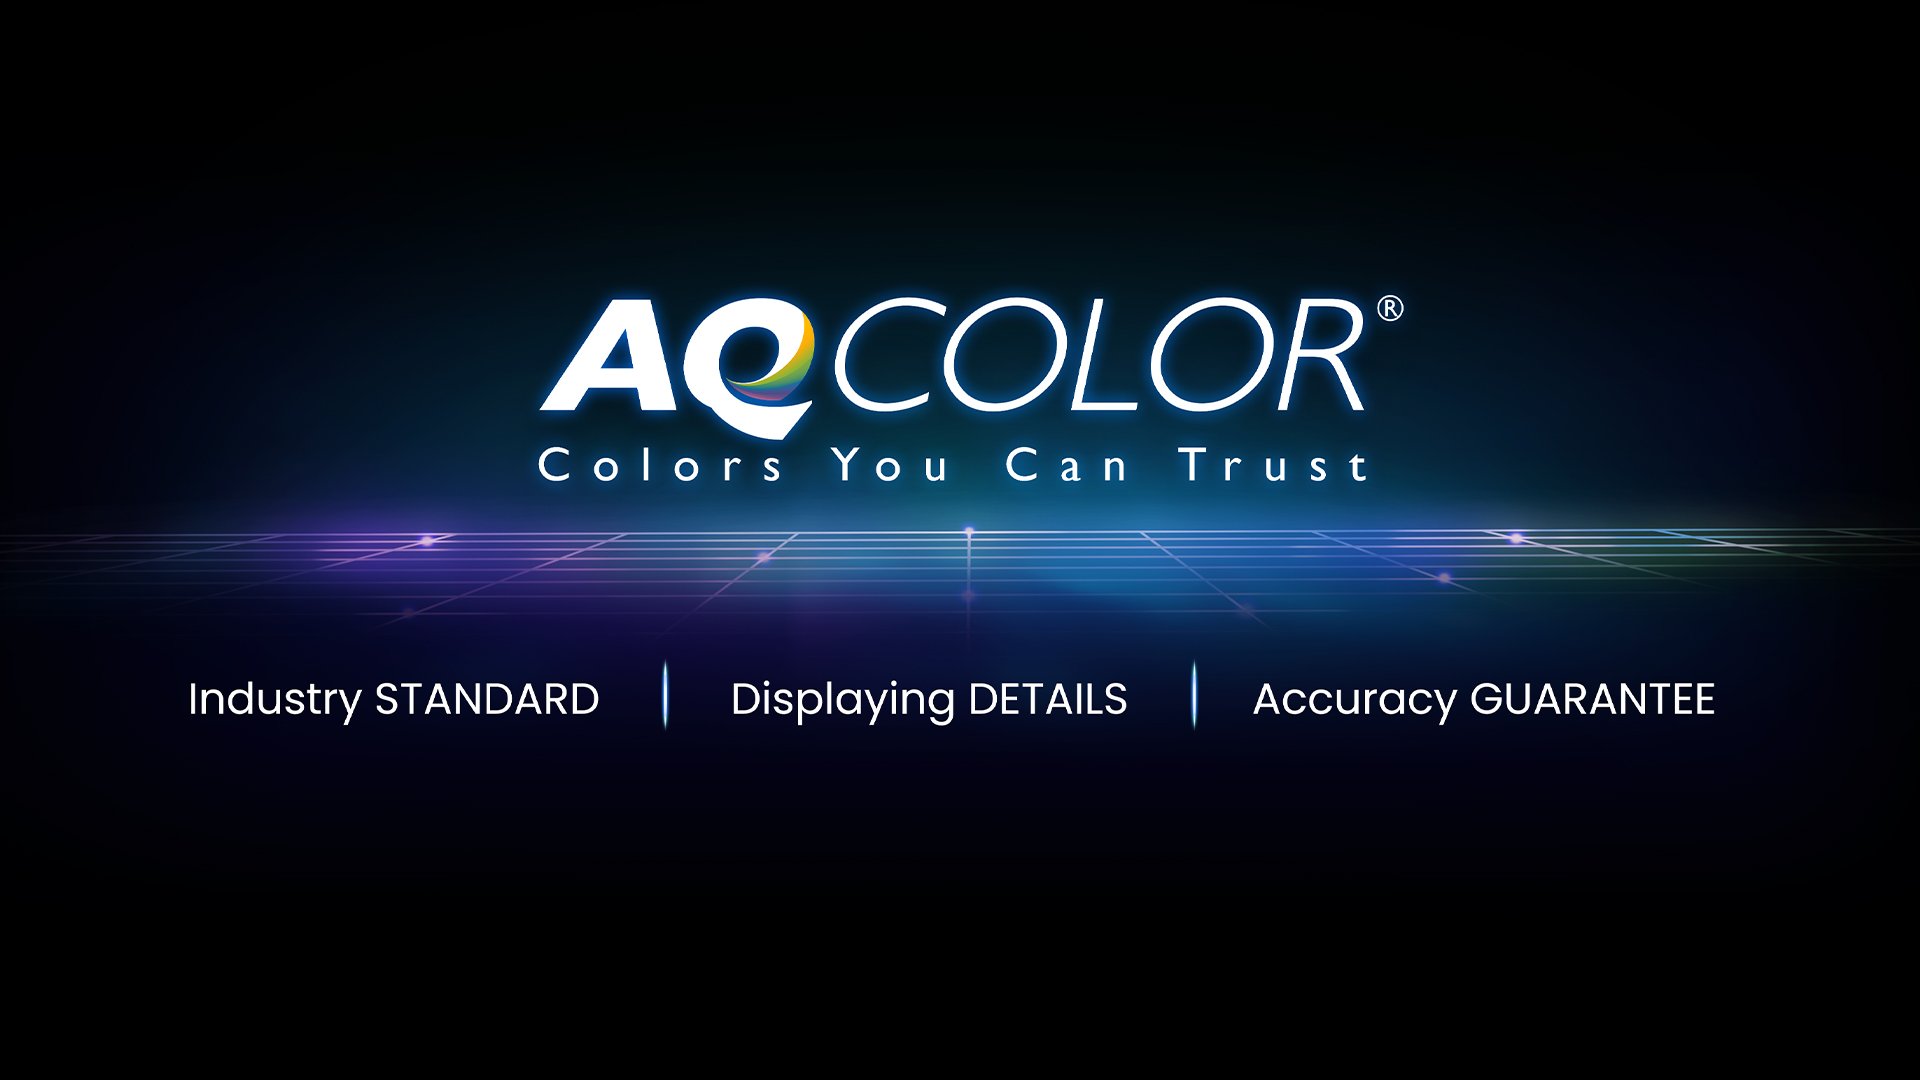 BenQ AQCOLOR technology delivers 'Accurate Reproduction.' This translates to the display of color precisely as it is intended to appear. With Delta E ≤ 2 and BenQ ICCsync, SW272U offers out-of-the-box and easy-to-reach colour accuracy. The 16-bit 3D lookup table (LUT) improves colour blending for precise reproduction. 